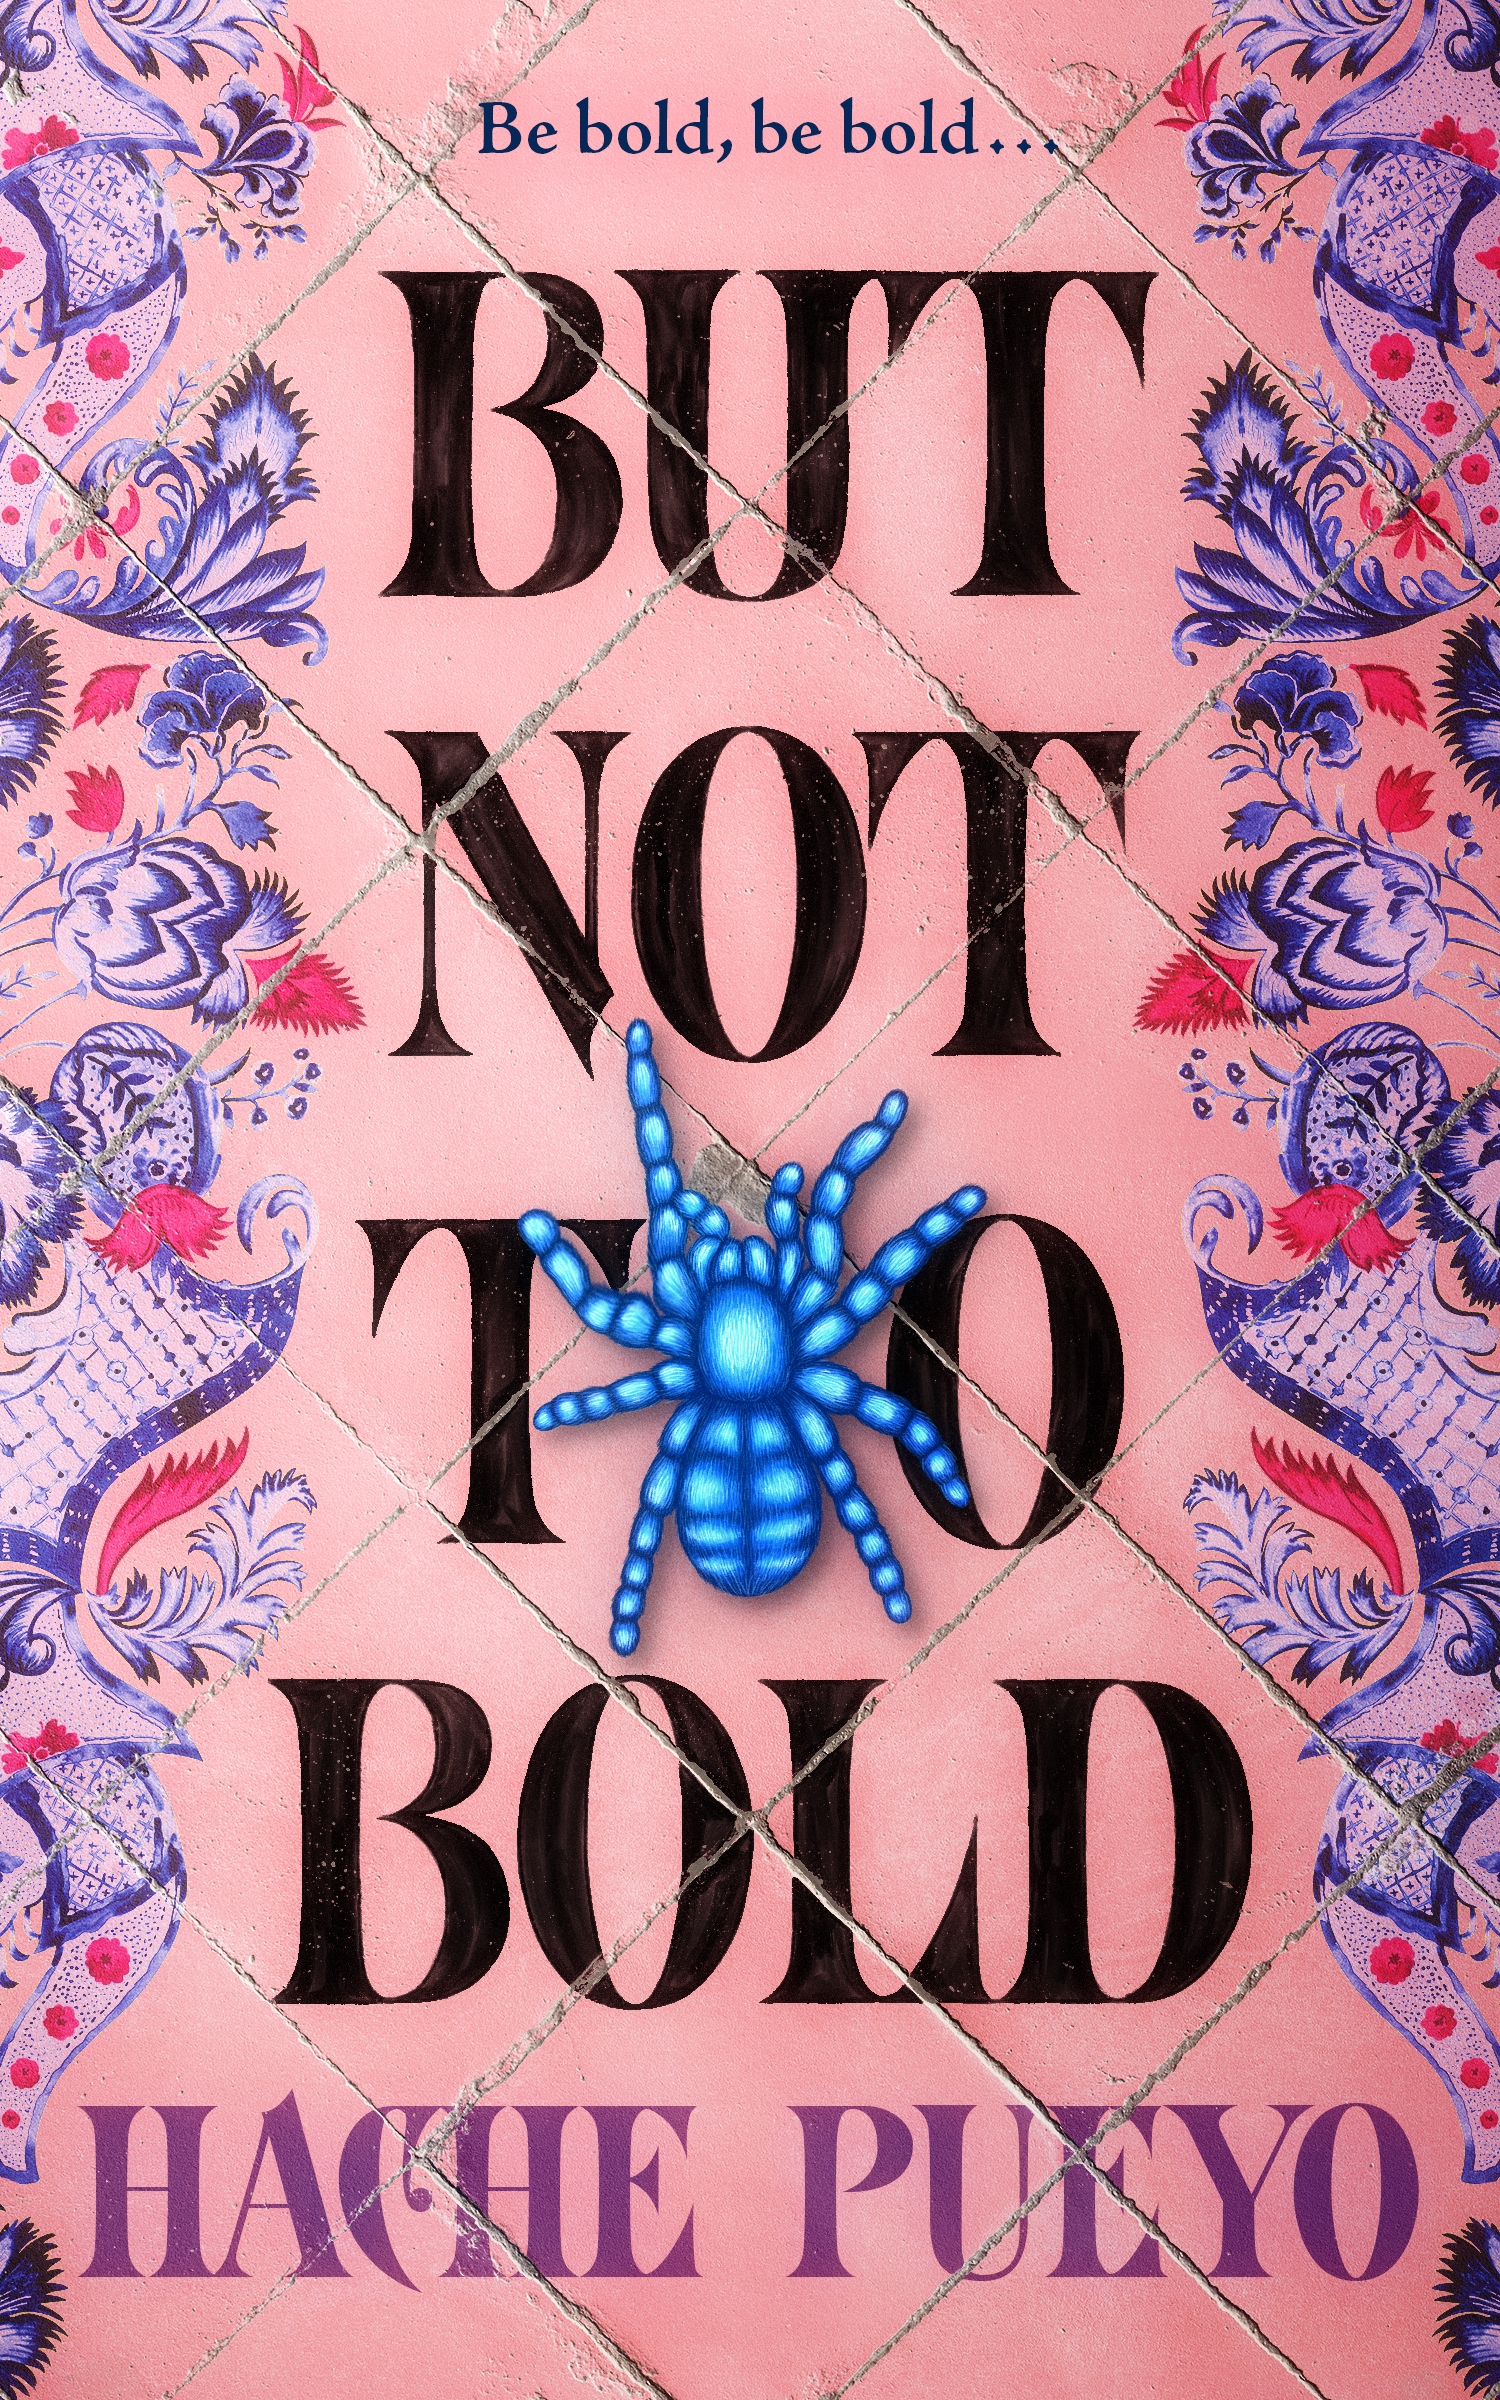 But Not Too Bold by Hache Pueyo